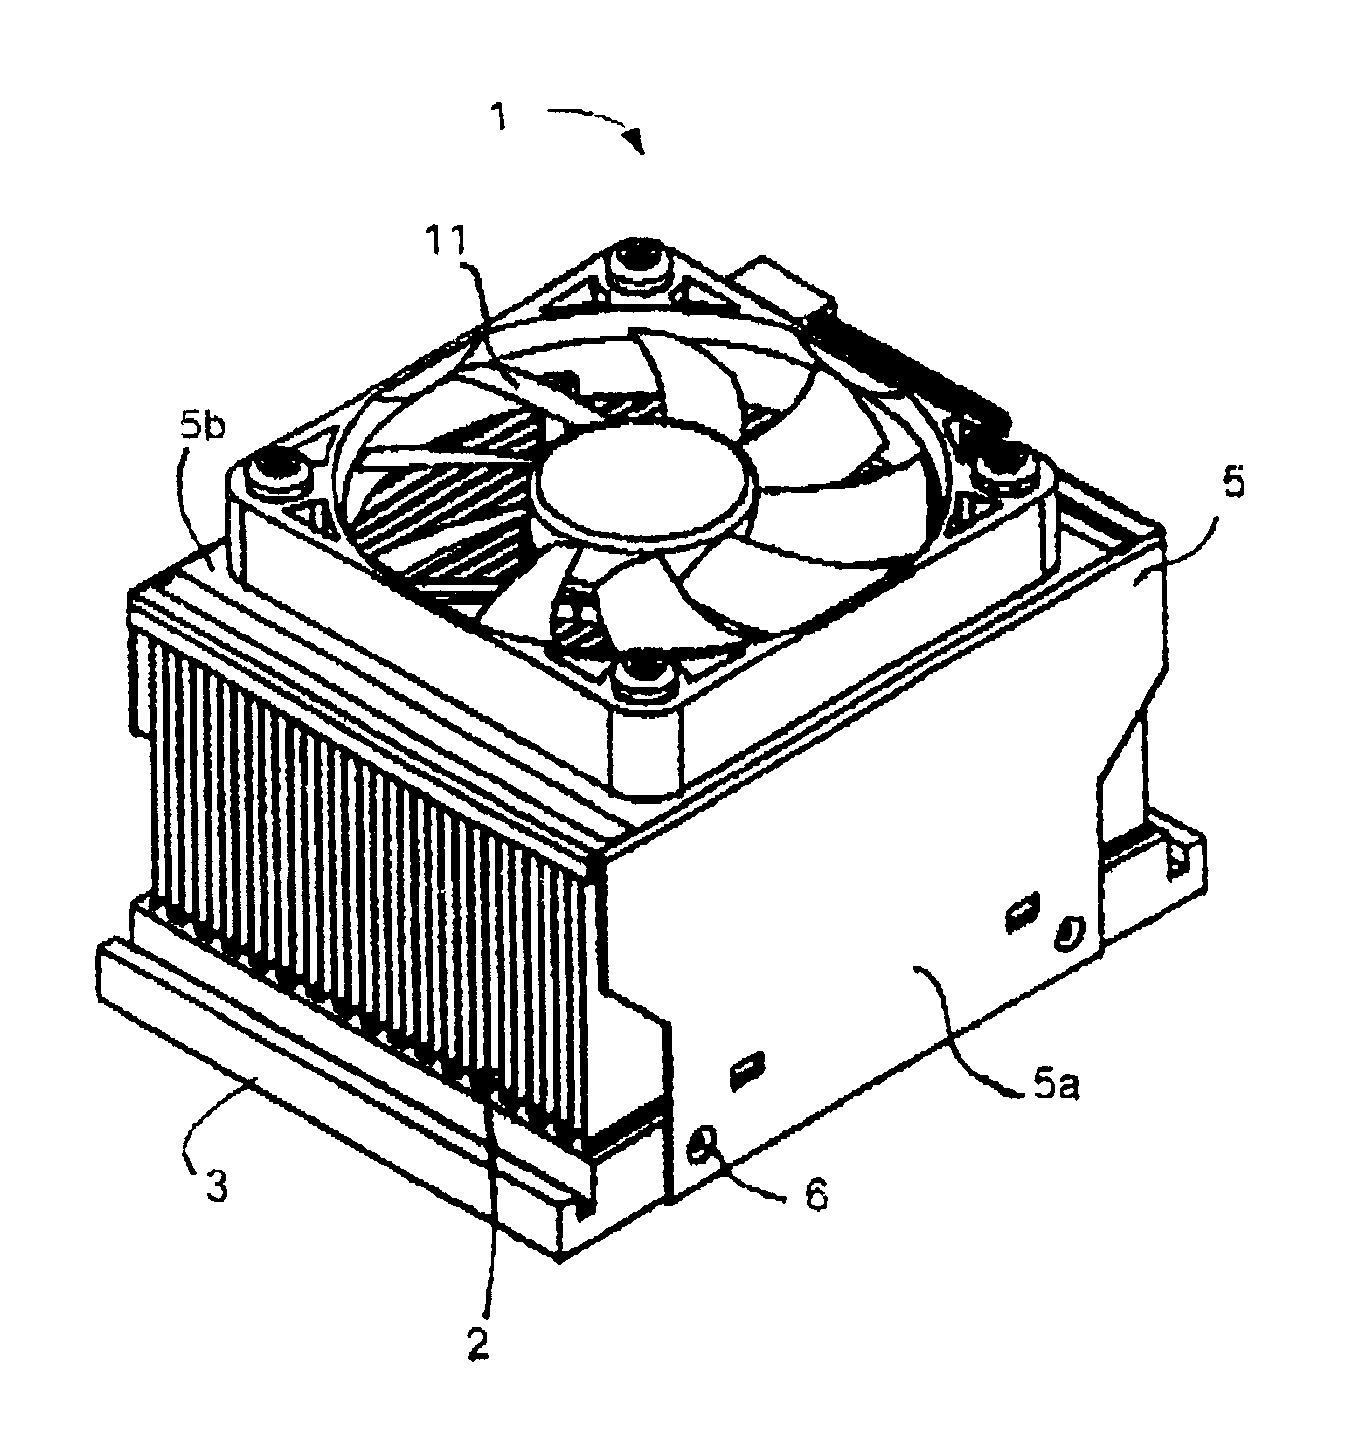 Folded-fin heat sink assembly and method of manufacturing same